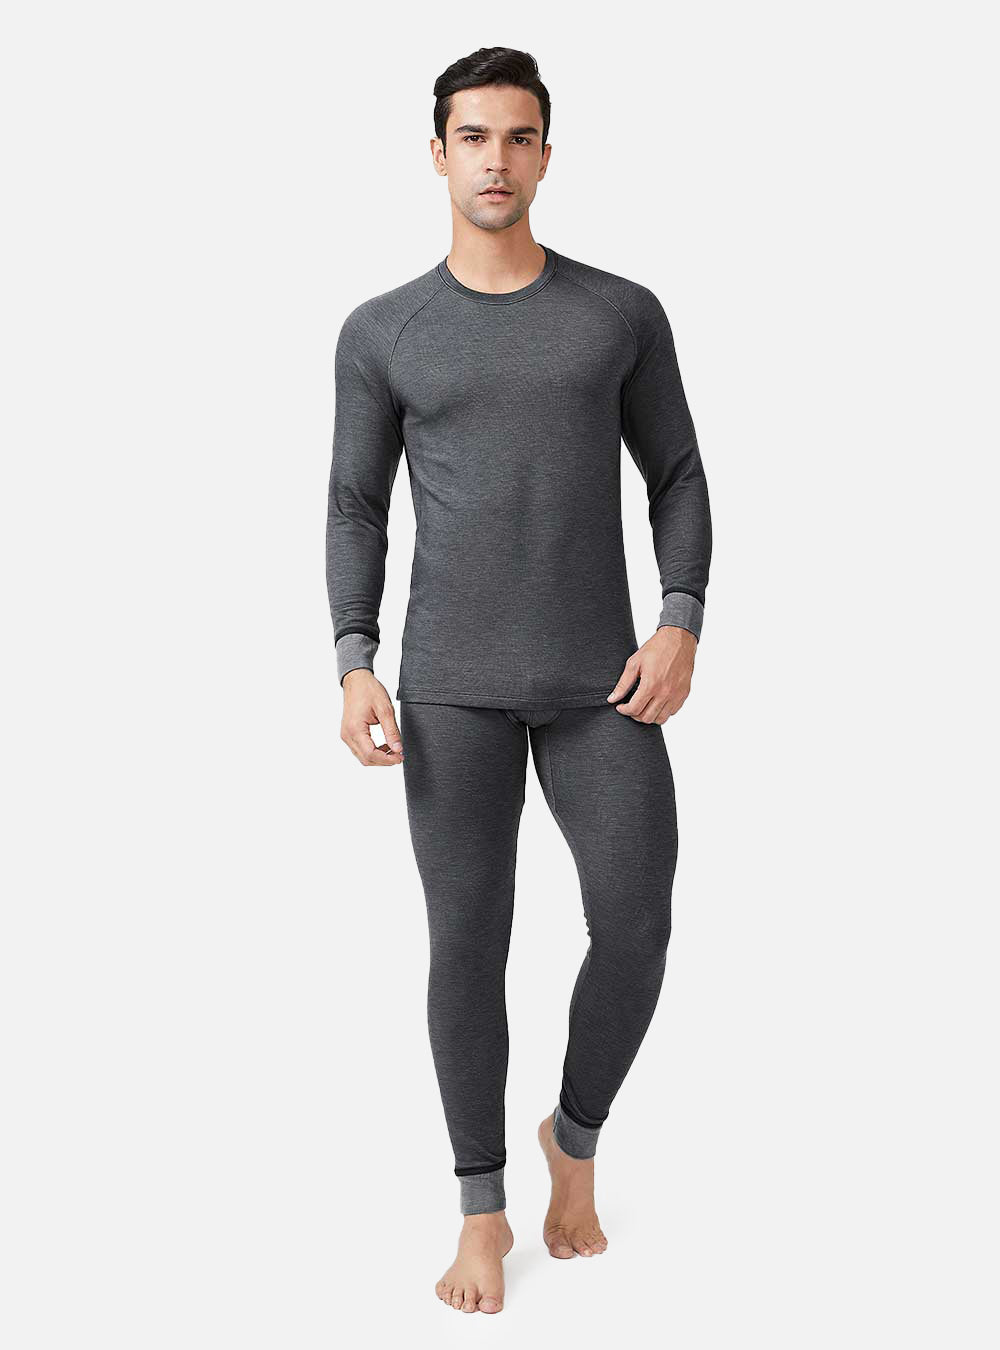 David Archy Thermal Set Cotton Double Layer Fleece Stretchy Smooth Double  Fleece Lined Base Layer